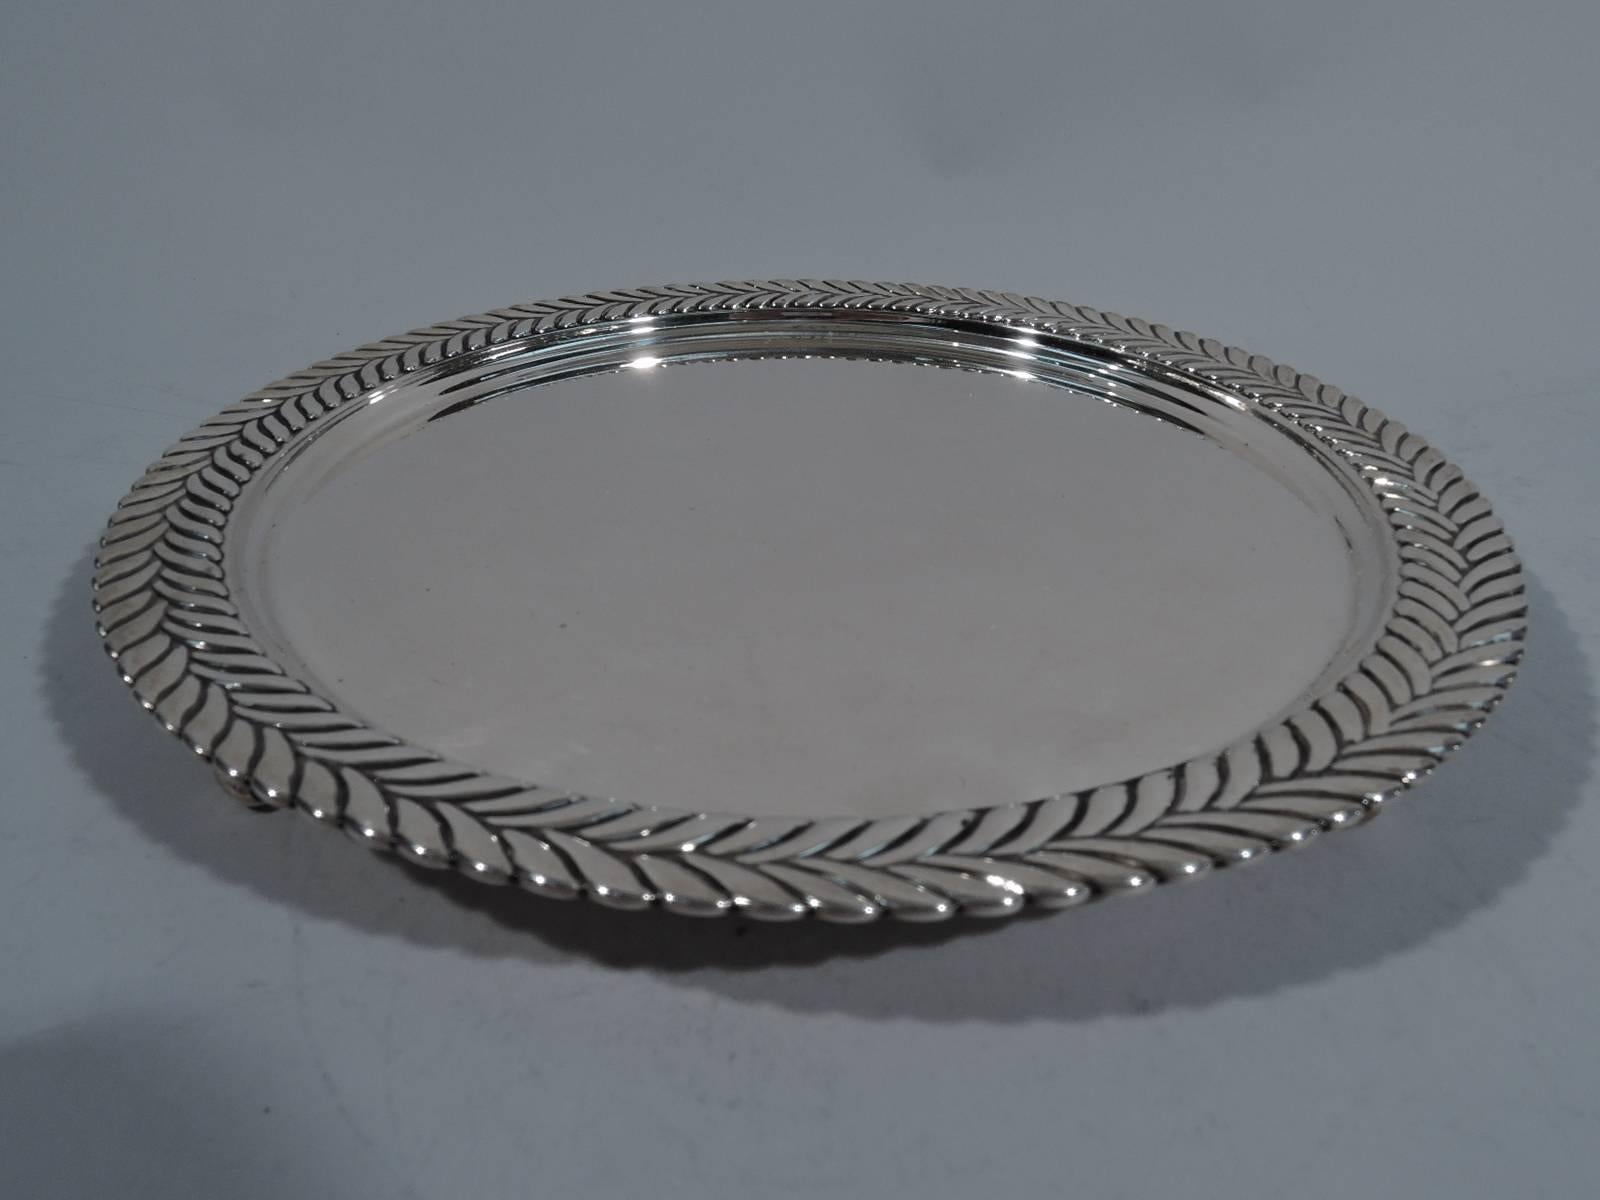 Sterling silver salver. Made by Tiffany & Co. in New York. Circular with plain well. Rim has semi-abstract imbricated leaf ornament. Bold Georgian inspiration. Rests on three traditional volute scrolls with same mount. Hallmark includes pattern no.